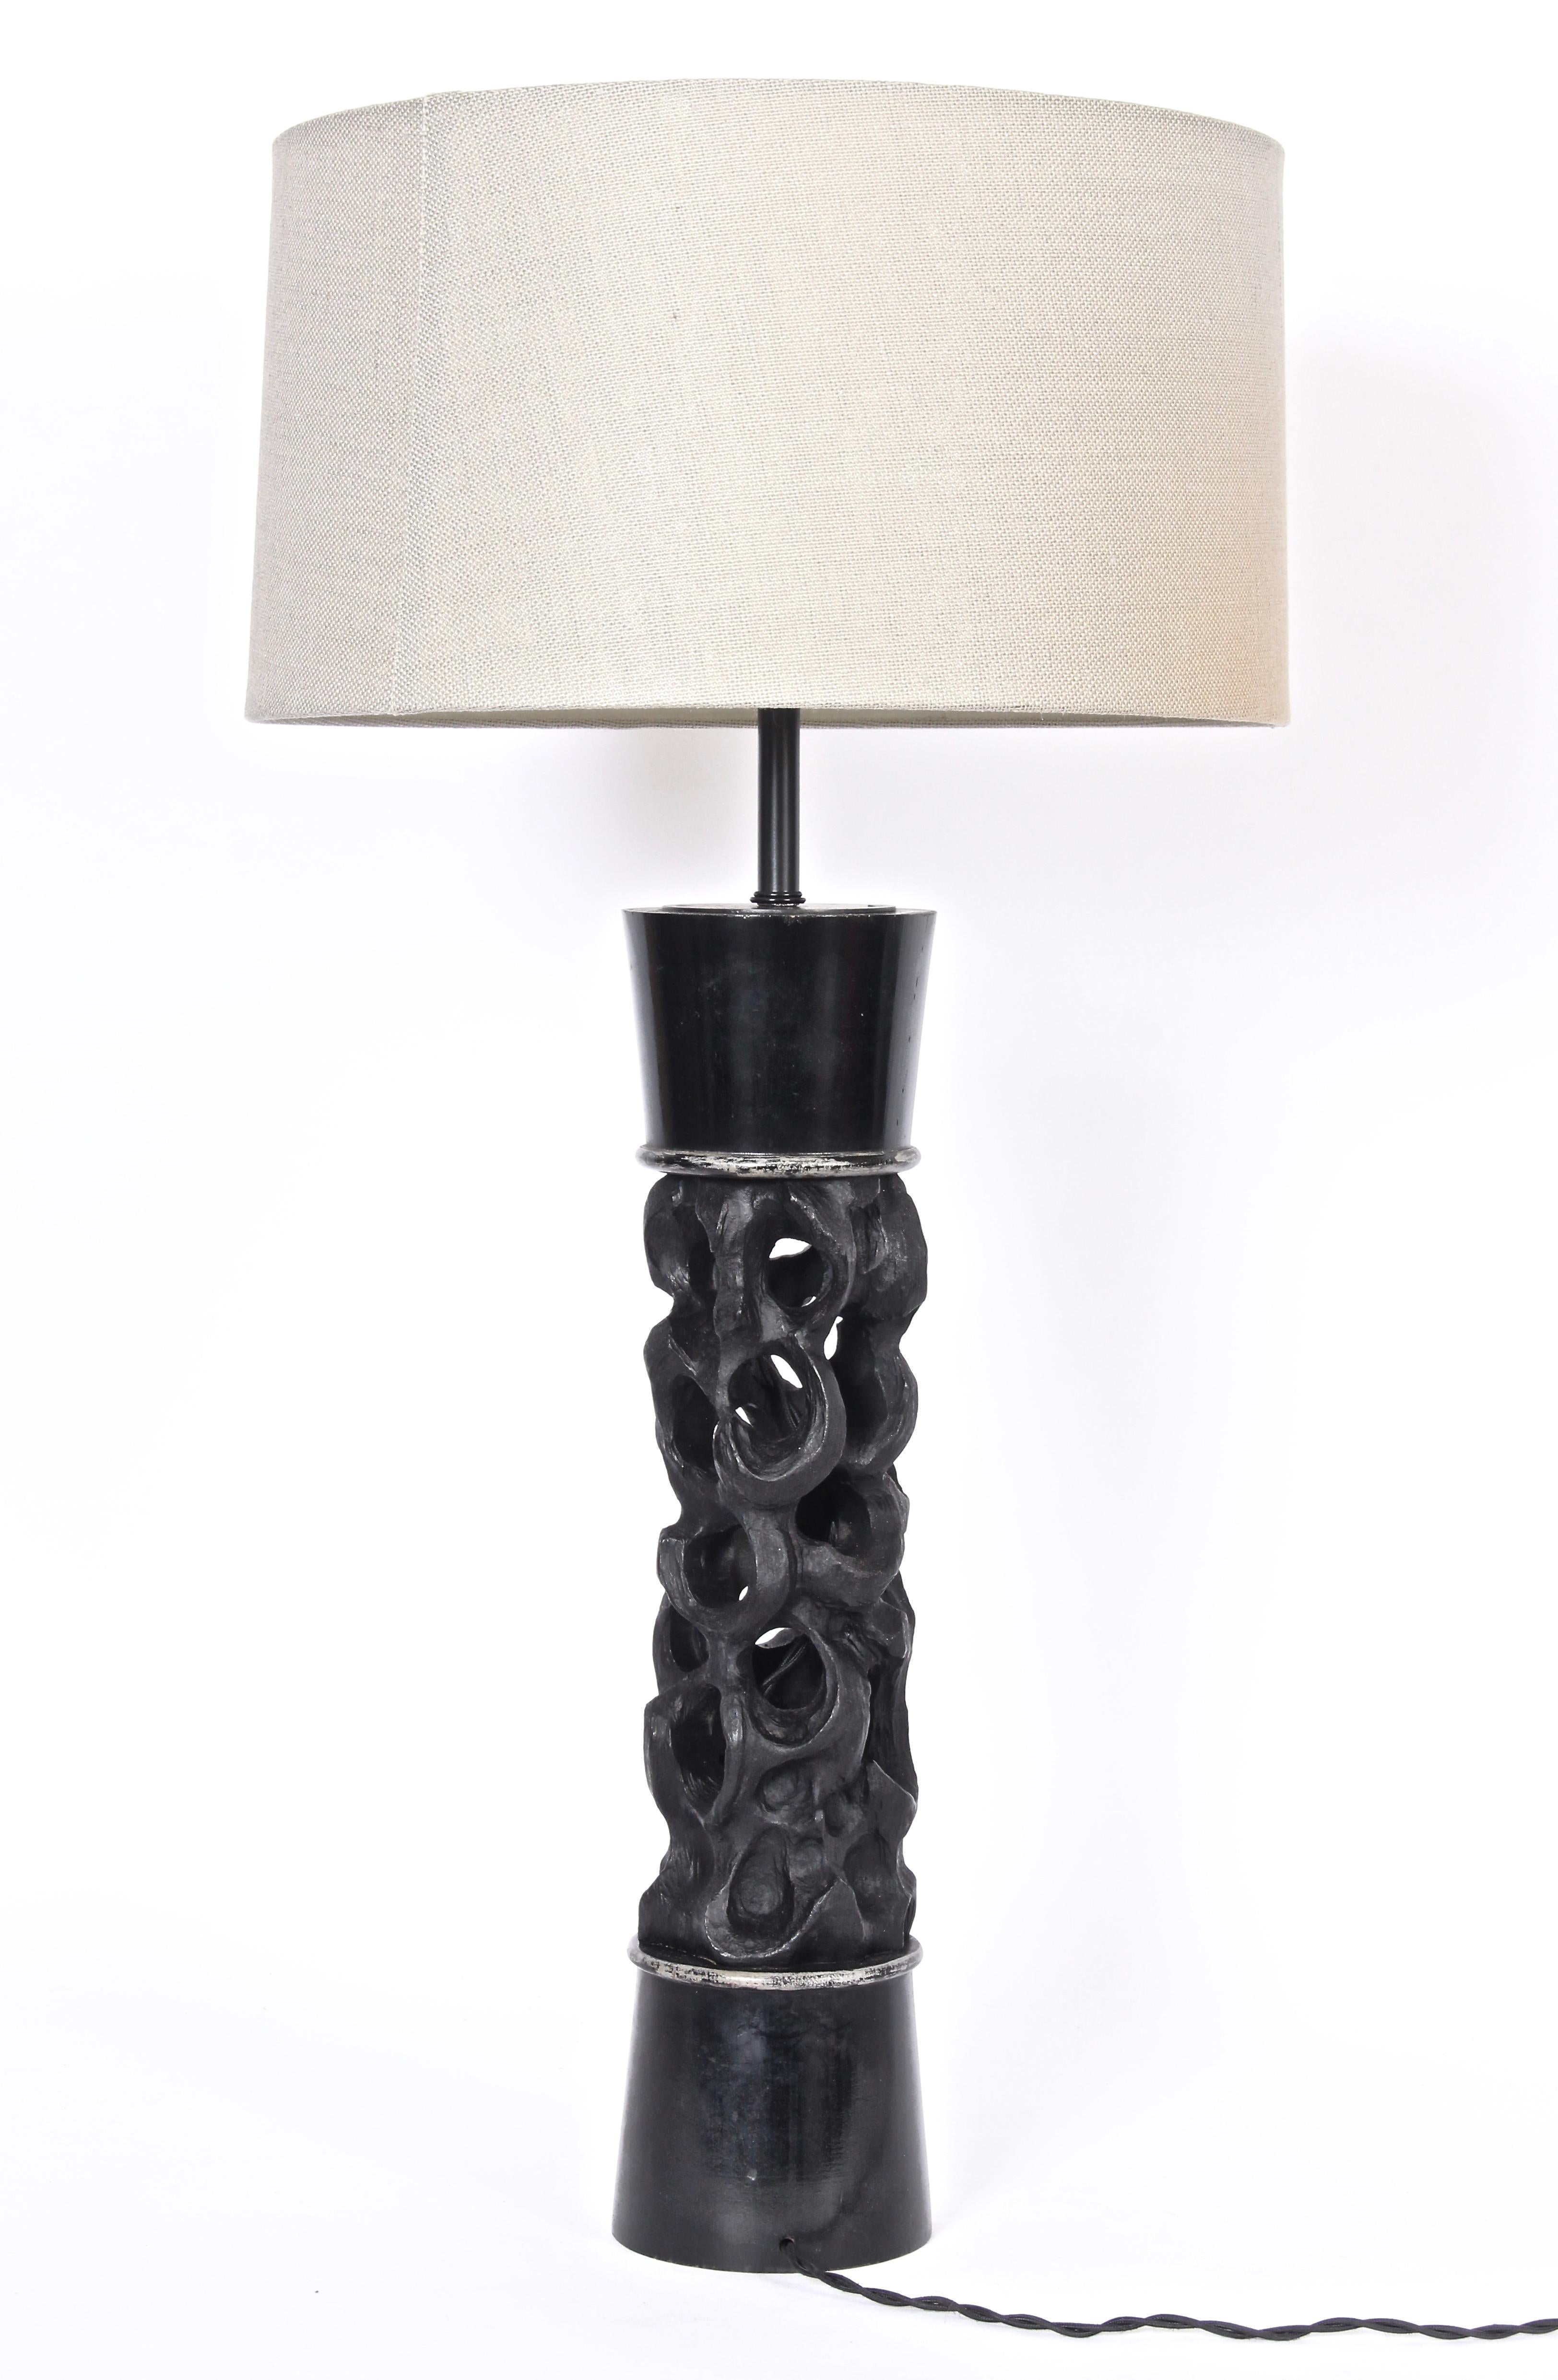 Monumental hand carved James Mont Pierced Column Table Lamp.  Featuring a large, slight hourglass form in blackened carved wood with silvered details. Small footprint. Shade shown for display only and not for sale (10 H x 17 D top x 18 D bottom). 